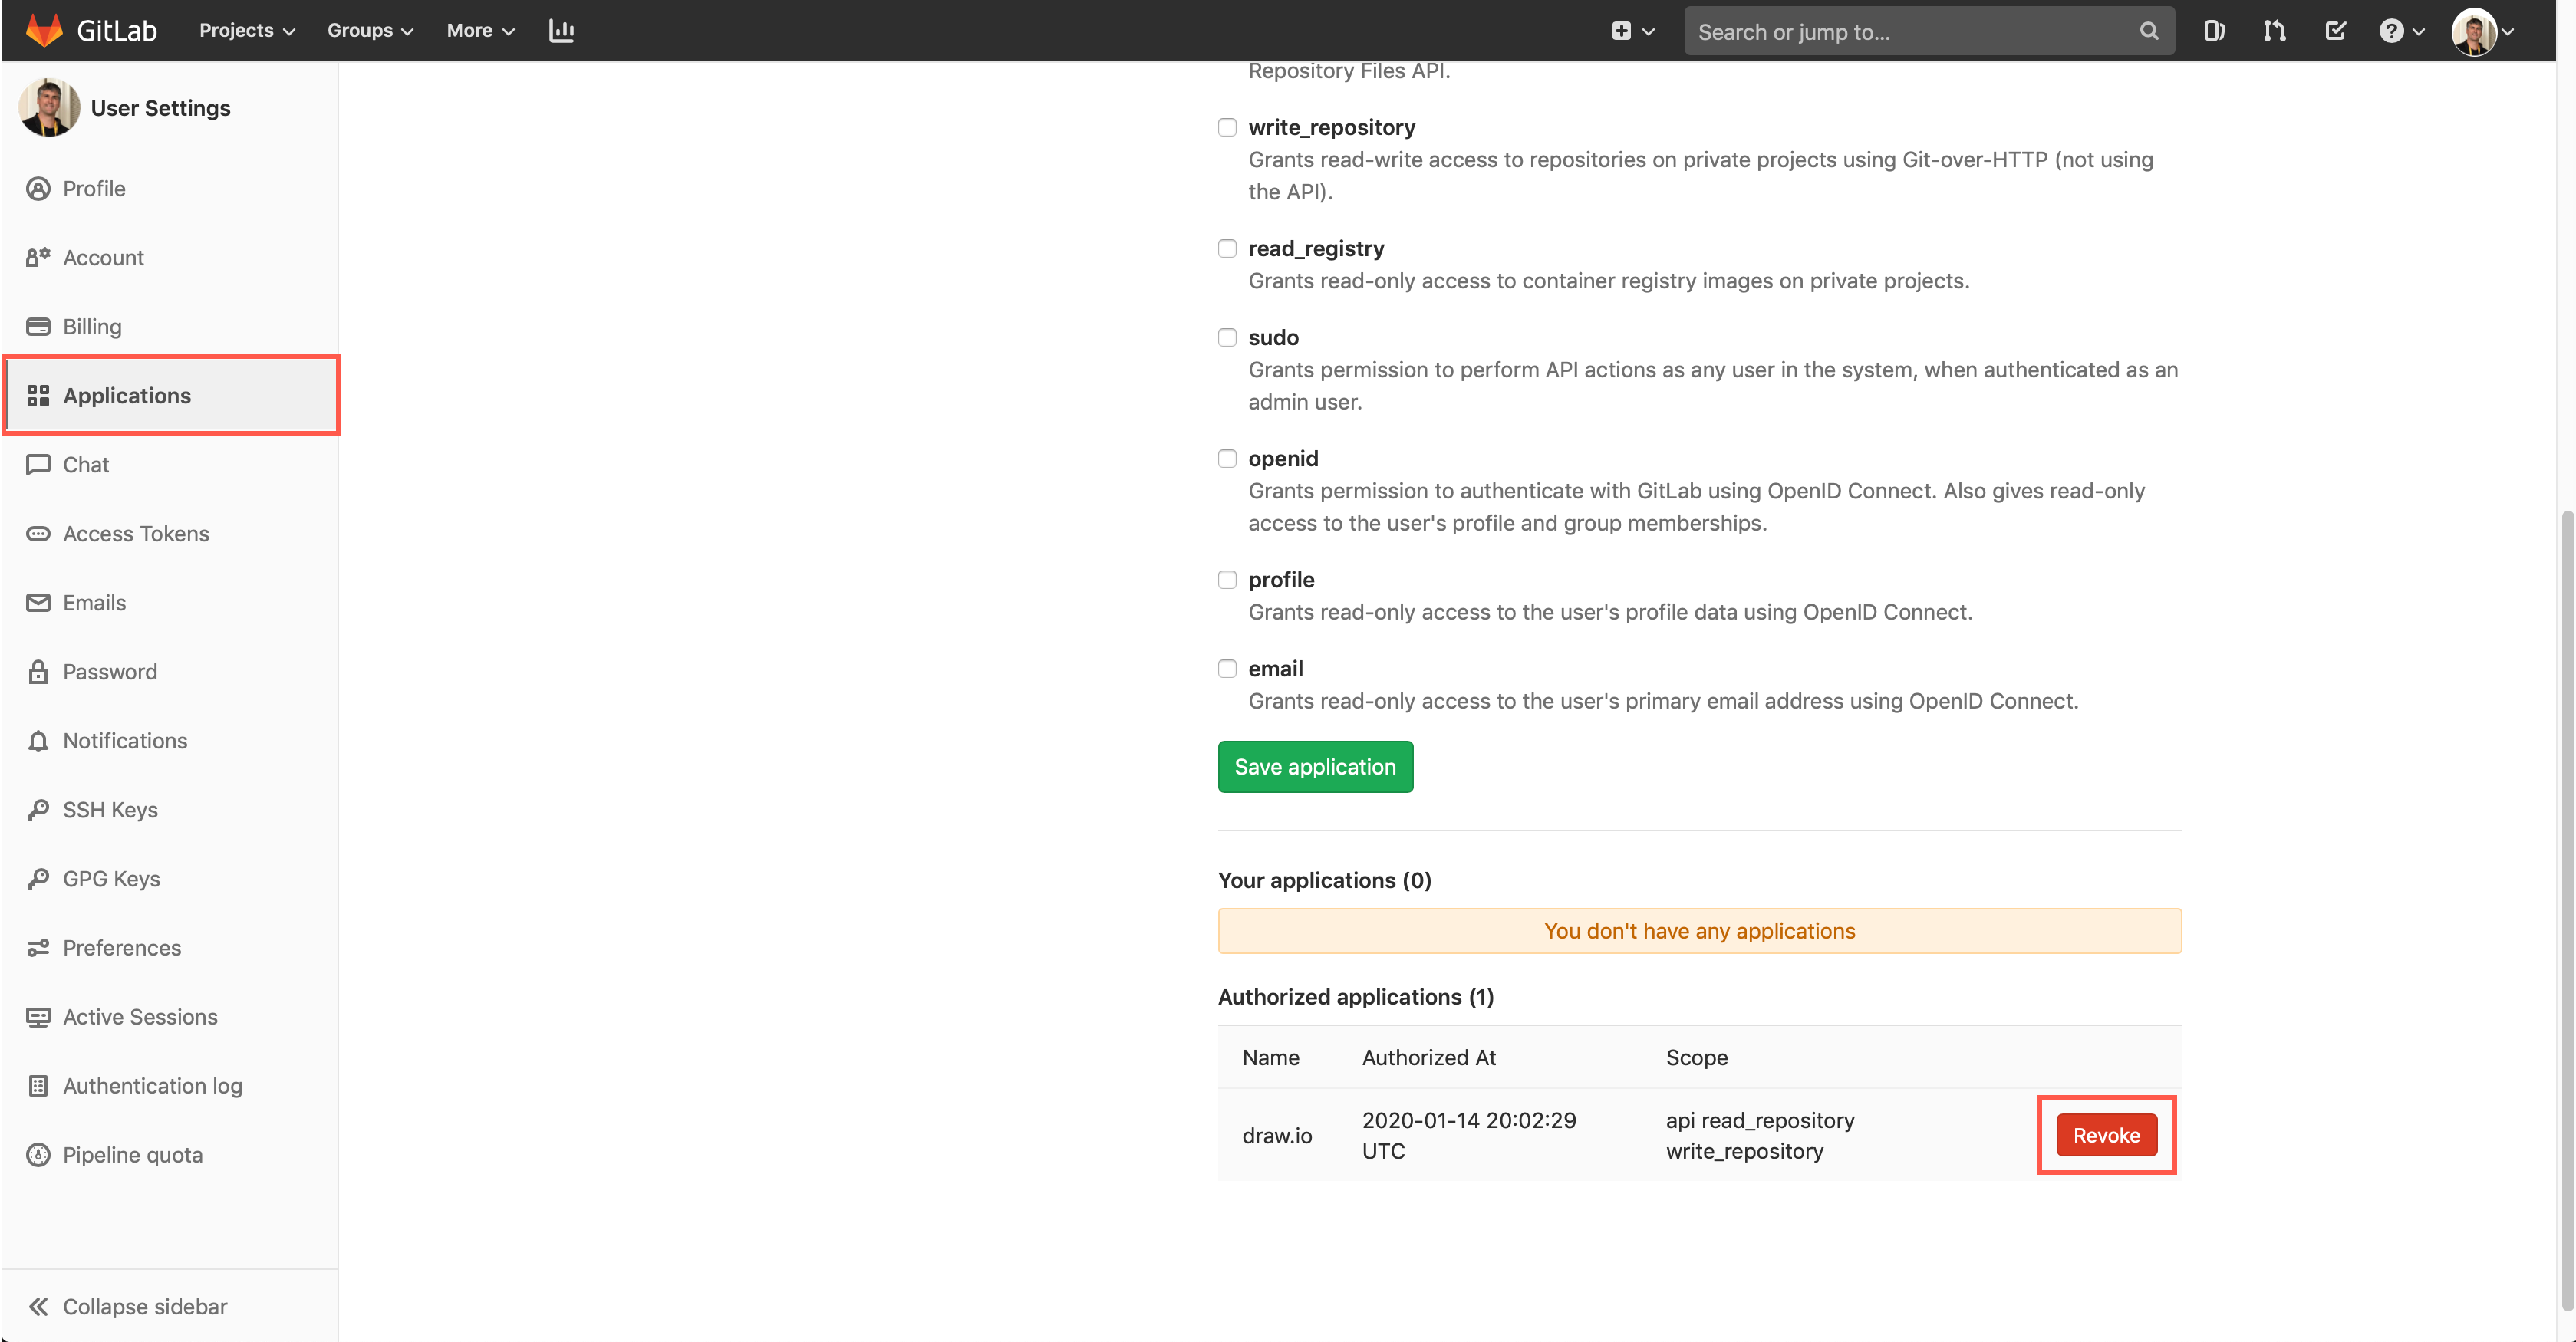 Revoke access to your account and repositories from within your GitLab user settings